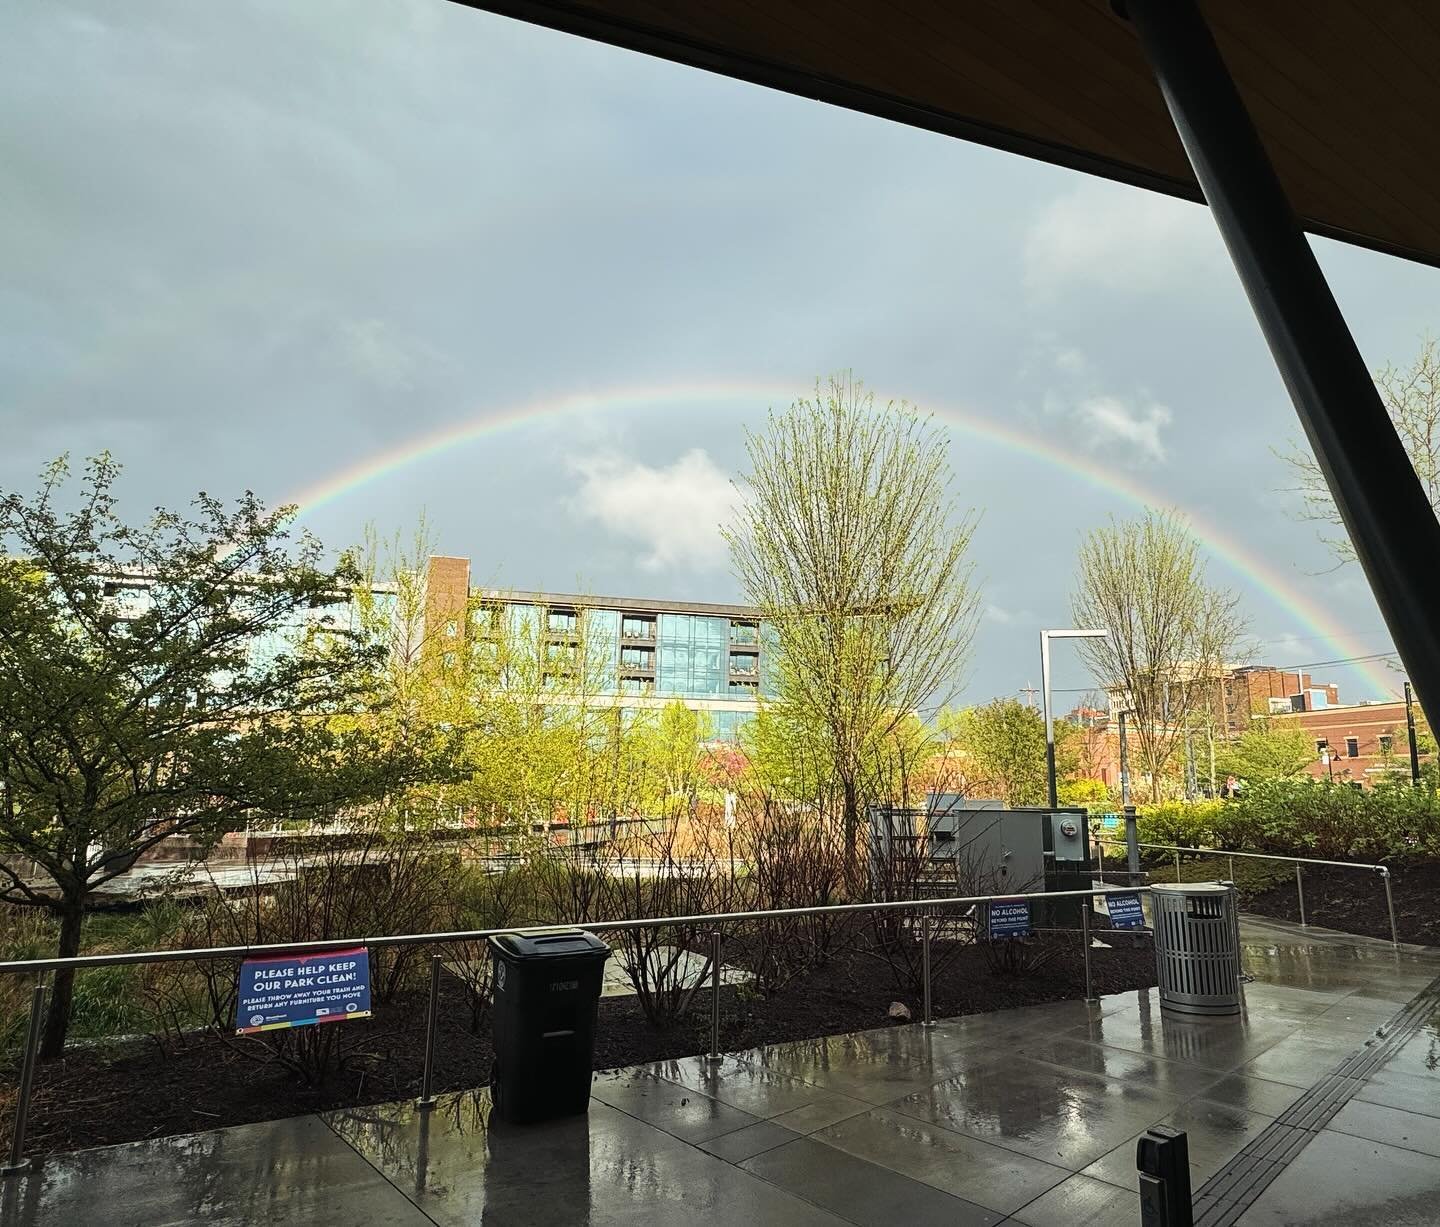 Getting setup for our spring re-opening at TEDS SNACK + BAR, and saw this beauty peak out from the clouds!

#rainbow #dtfw #fortwayne #snackbar #openingsoon #summeriscoming #teds